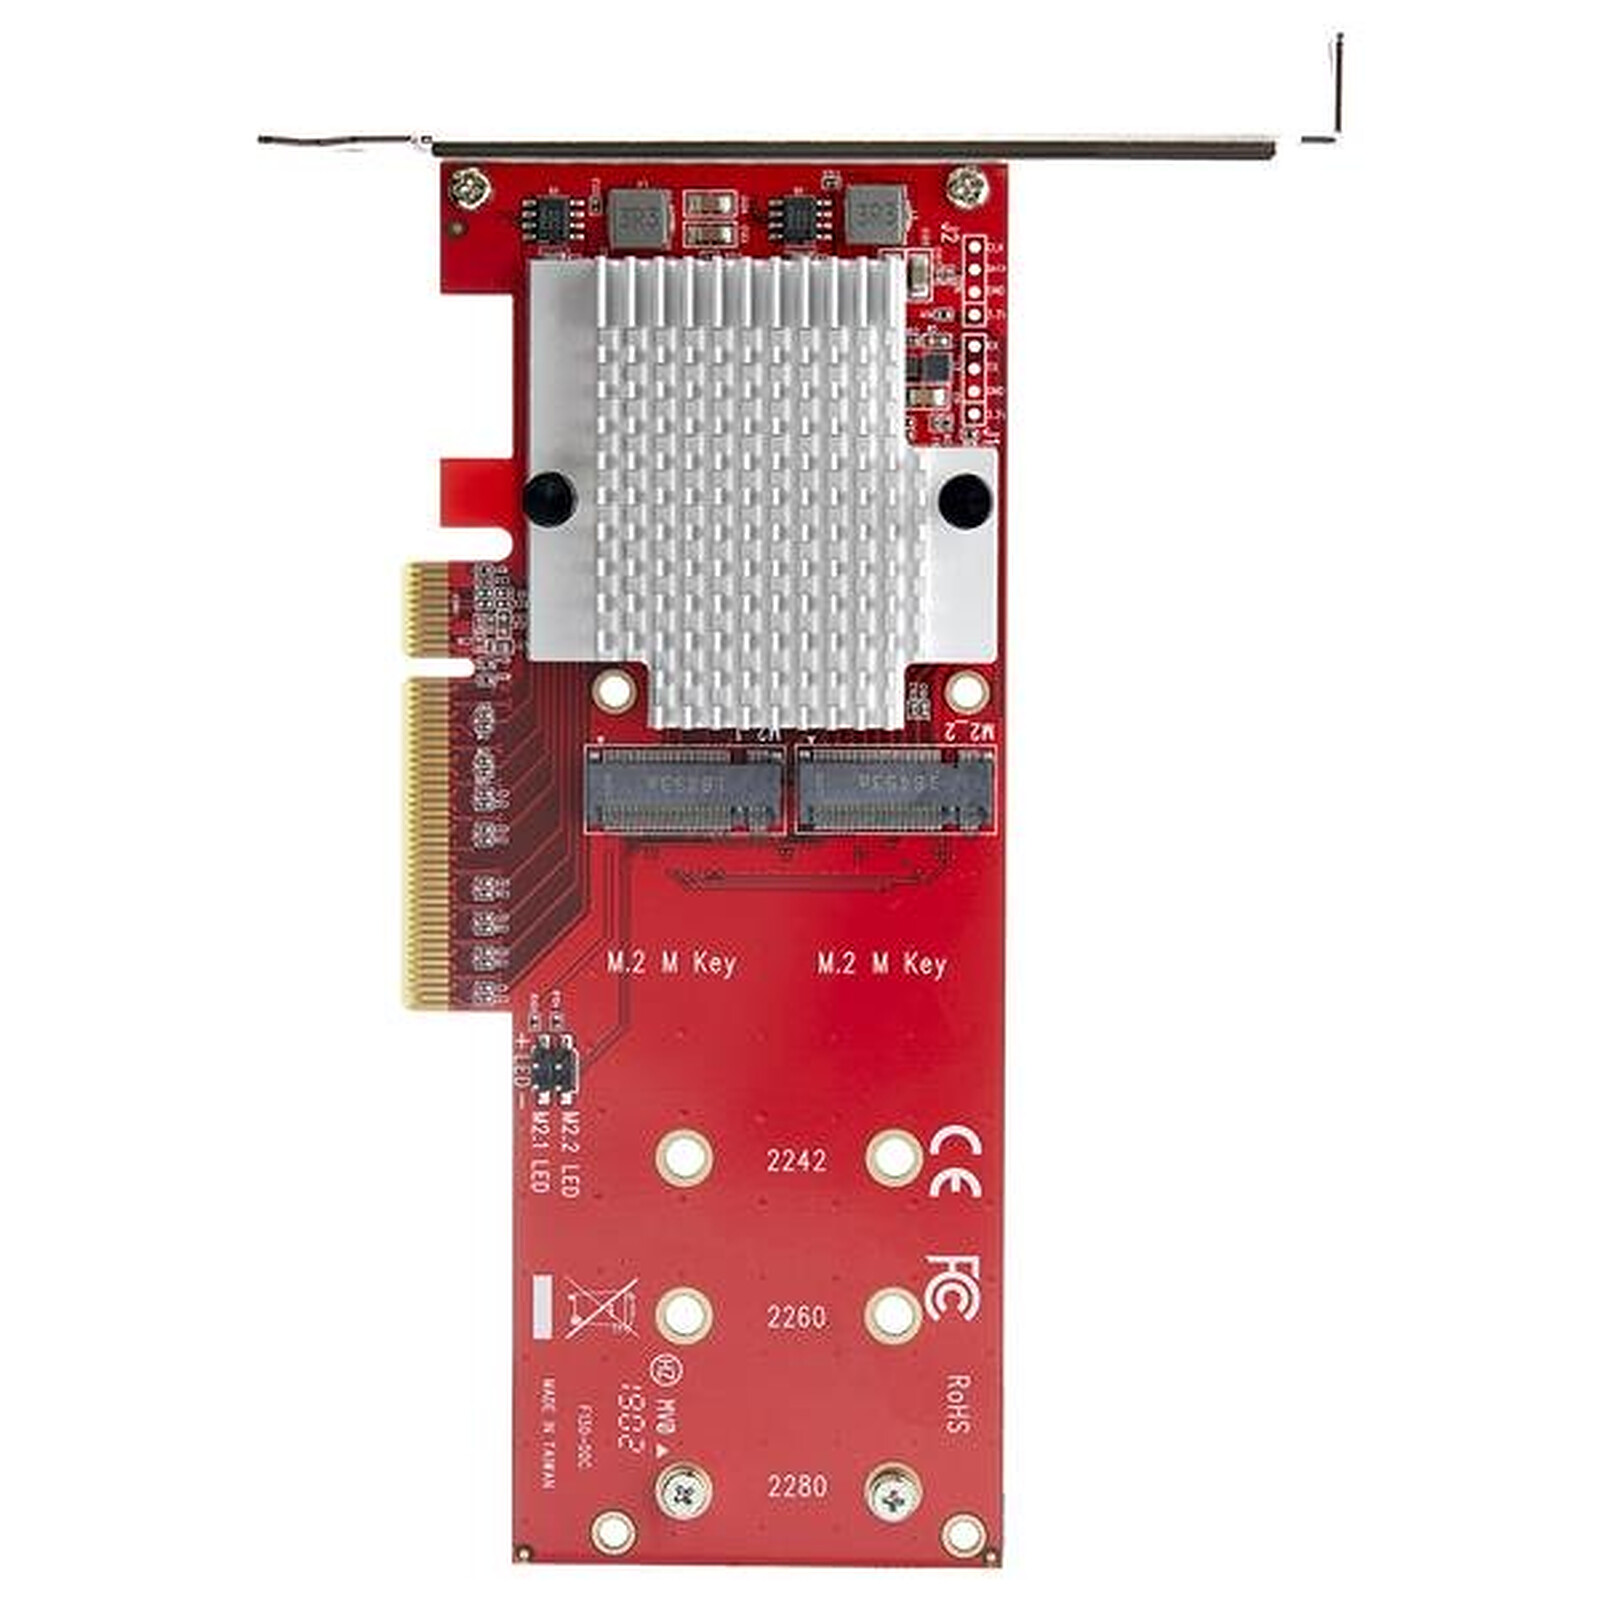 Dual M.2 to PCIe Adapter, RIITOP M.2 NVMe SSD to PCIe Adapter & NGFF (